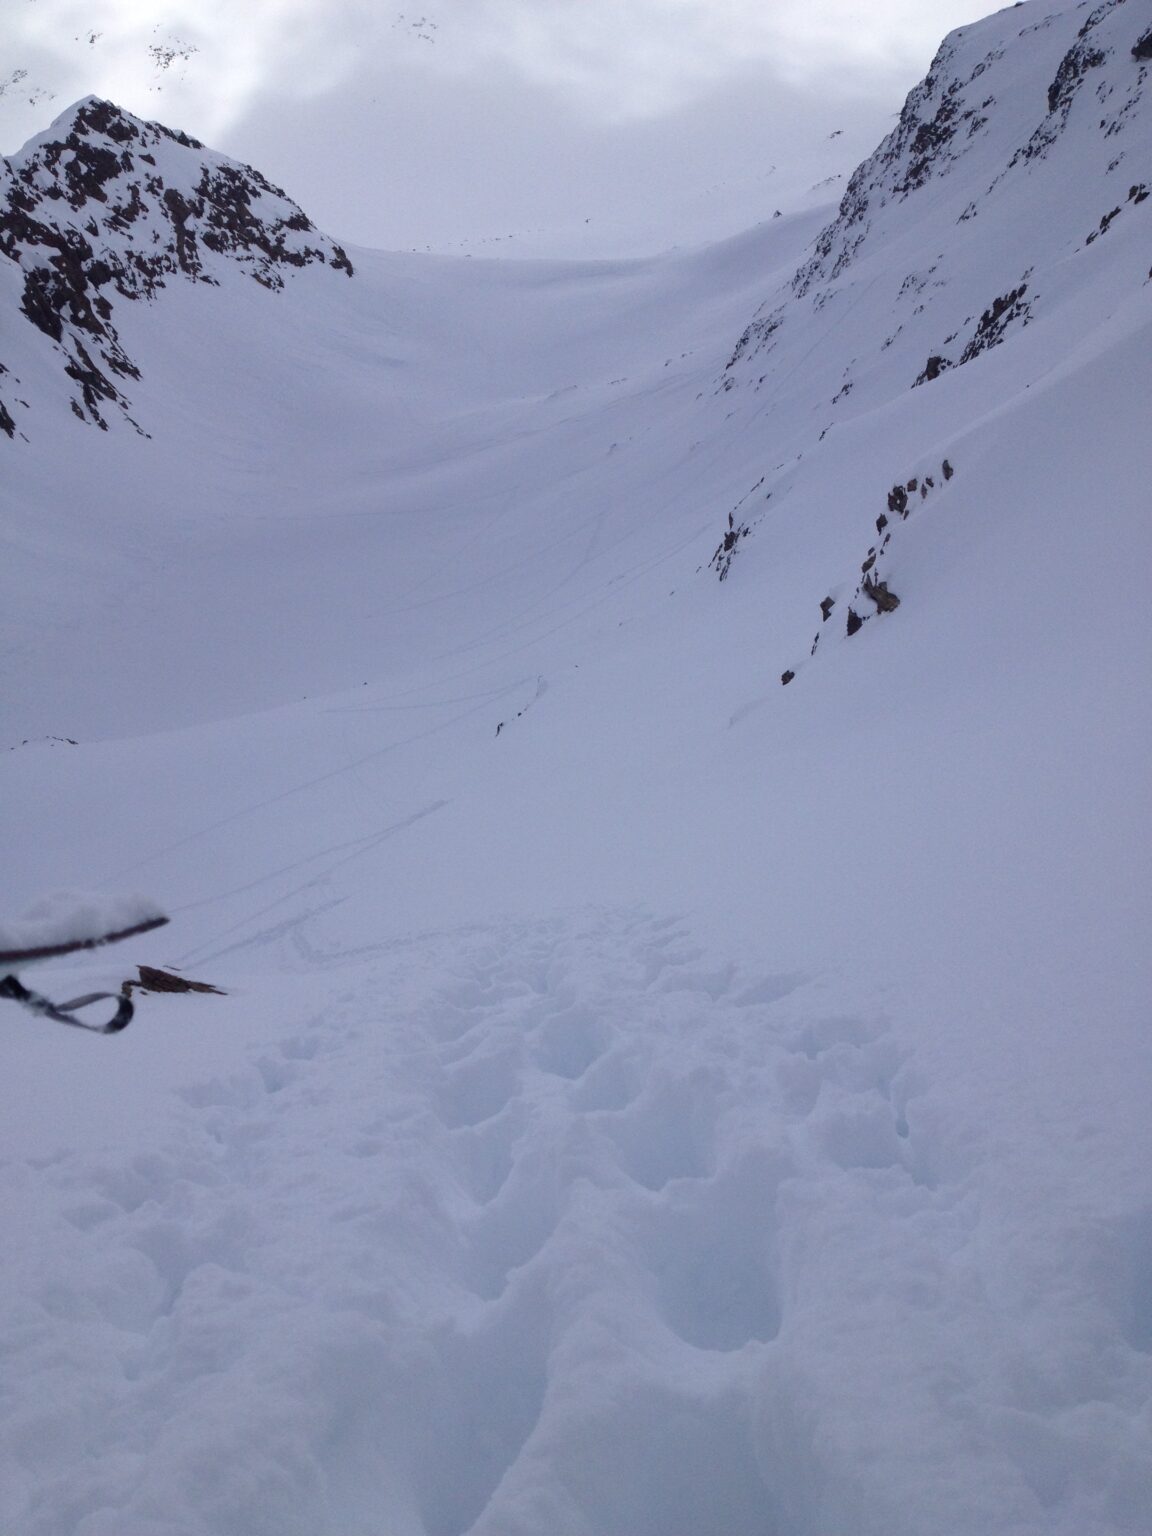 Bootpacking up to a low ridge to get some powder turn